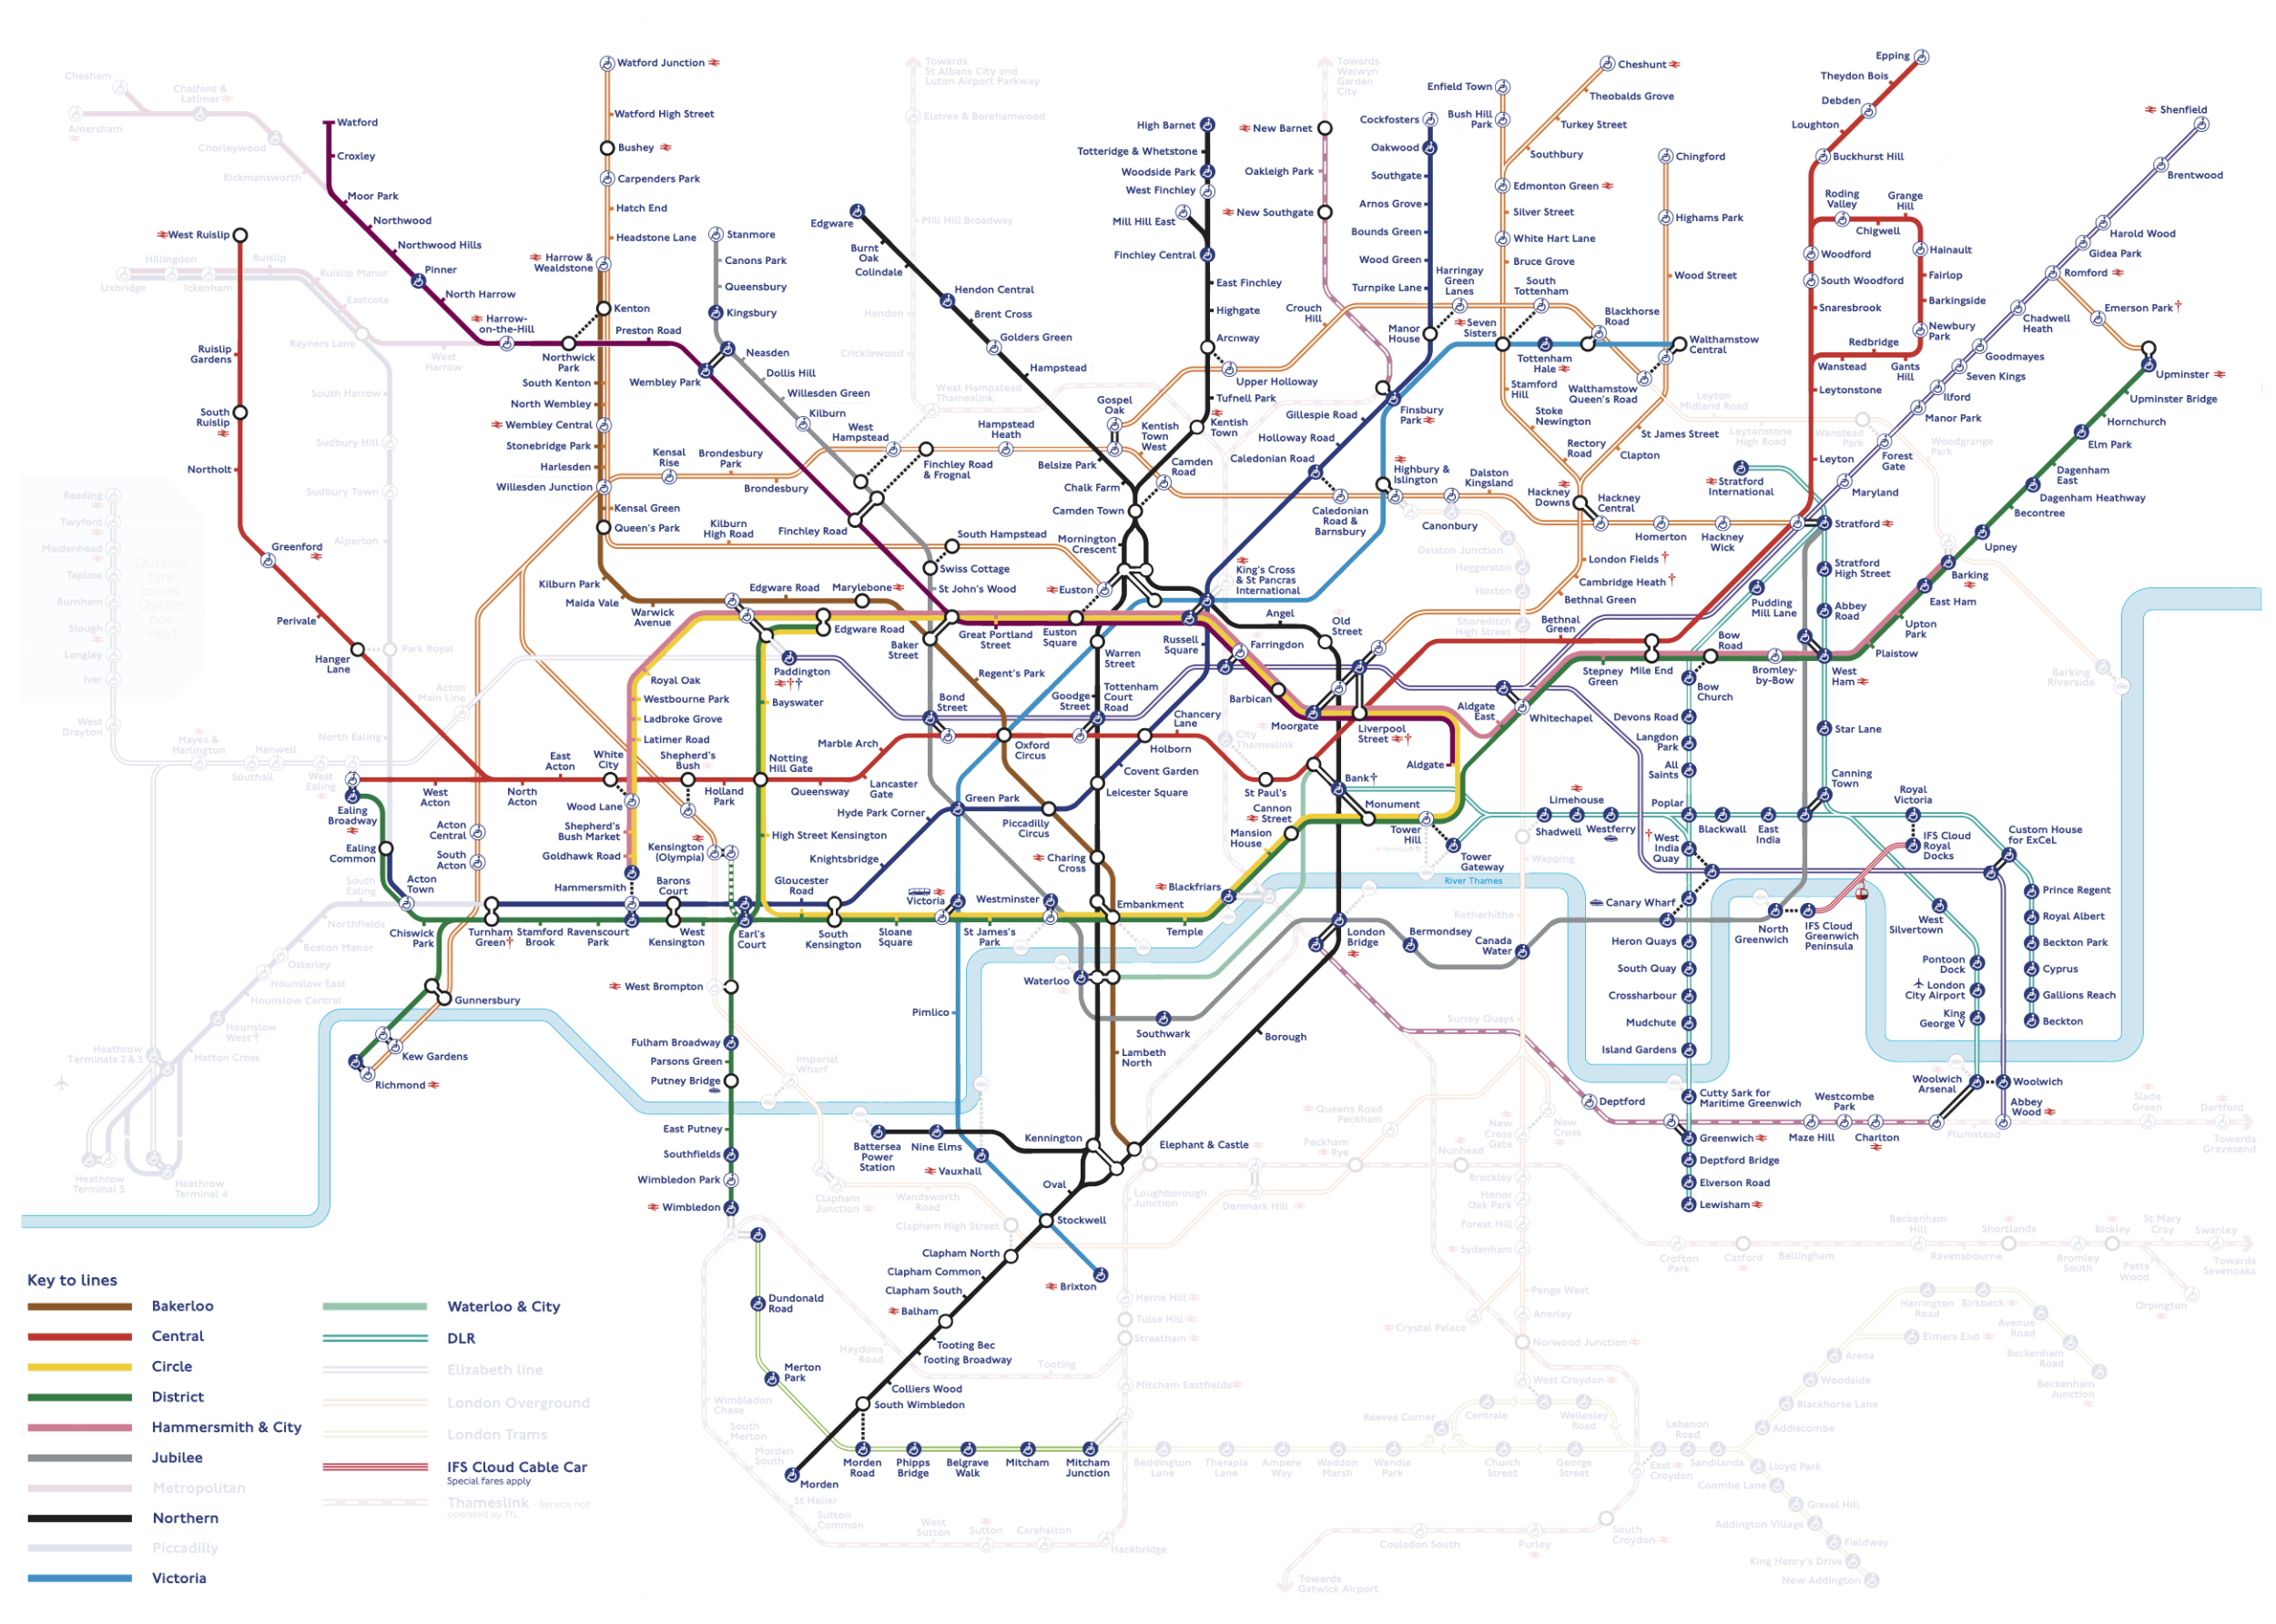 A map showing the parts of the TfL map that I have  walked.